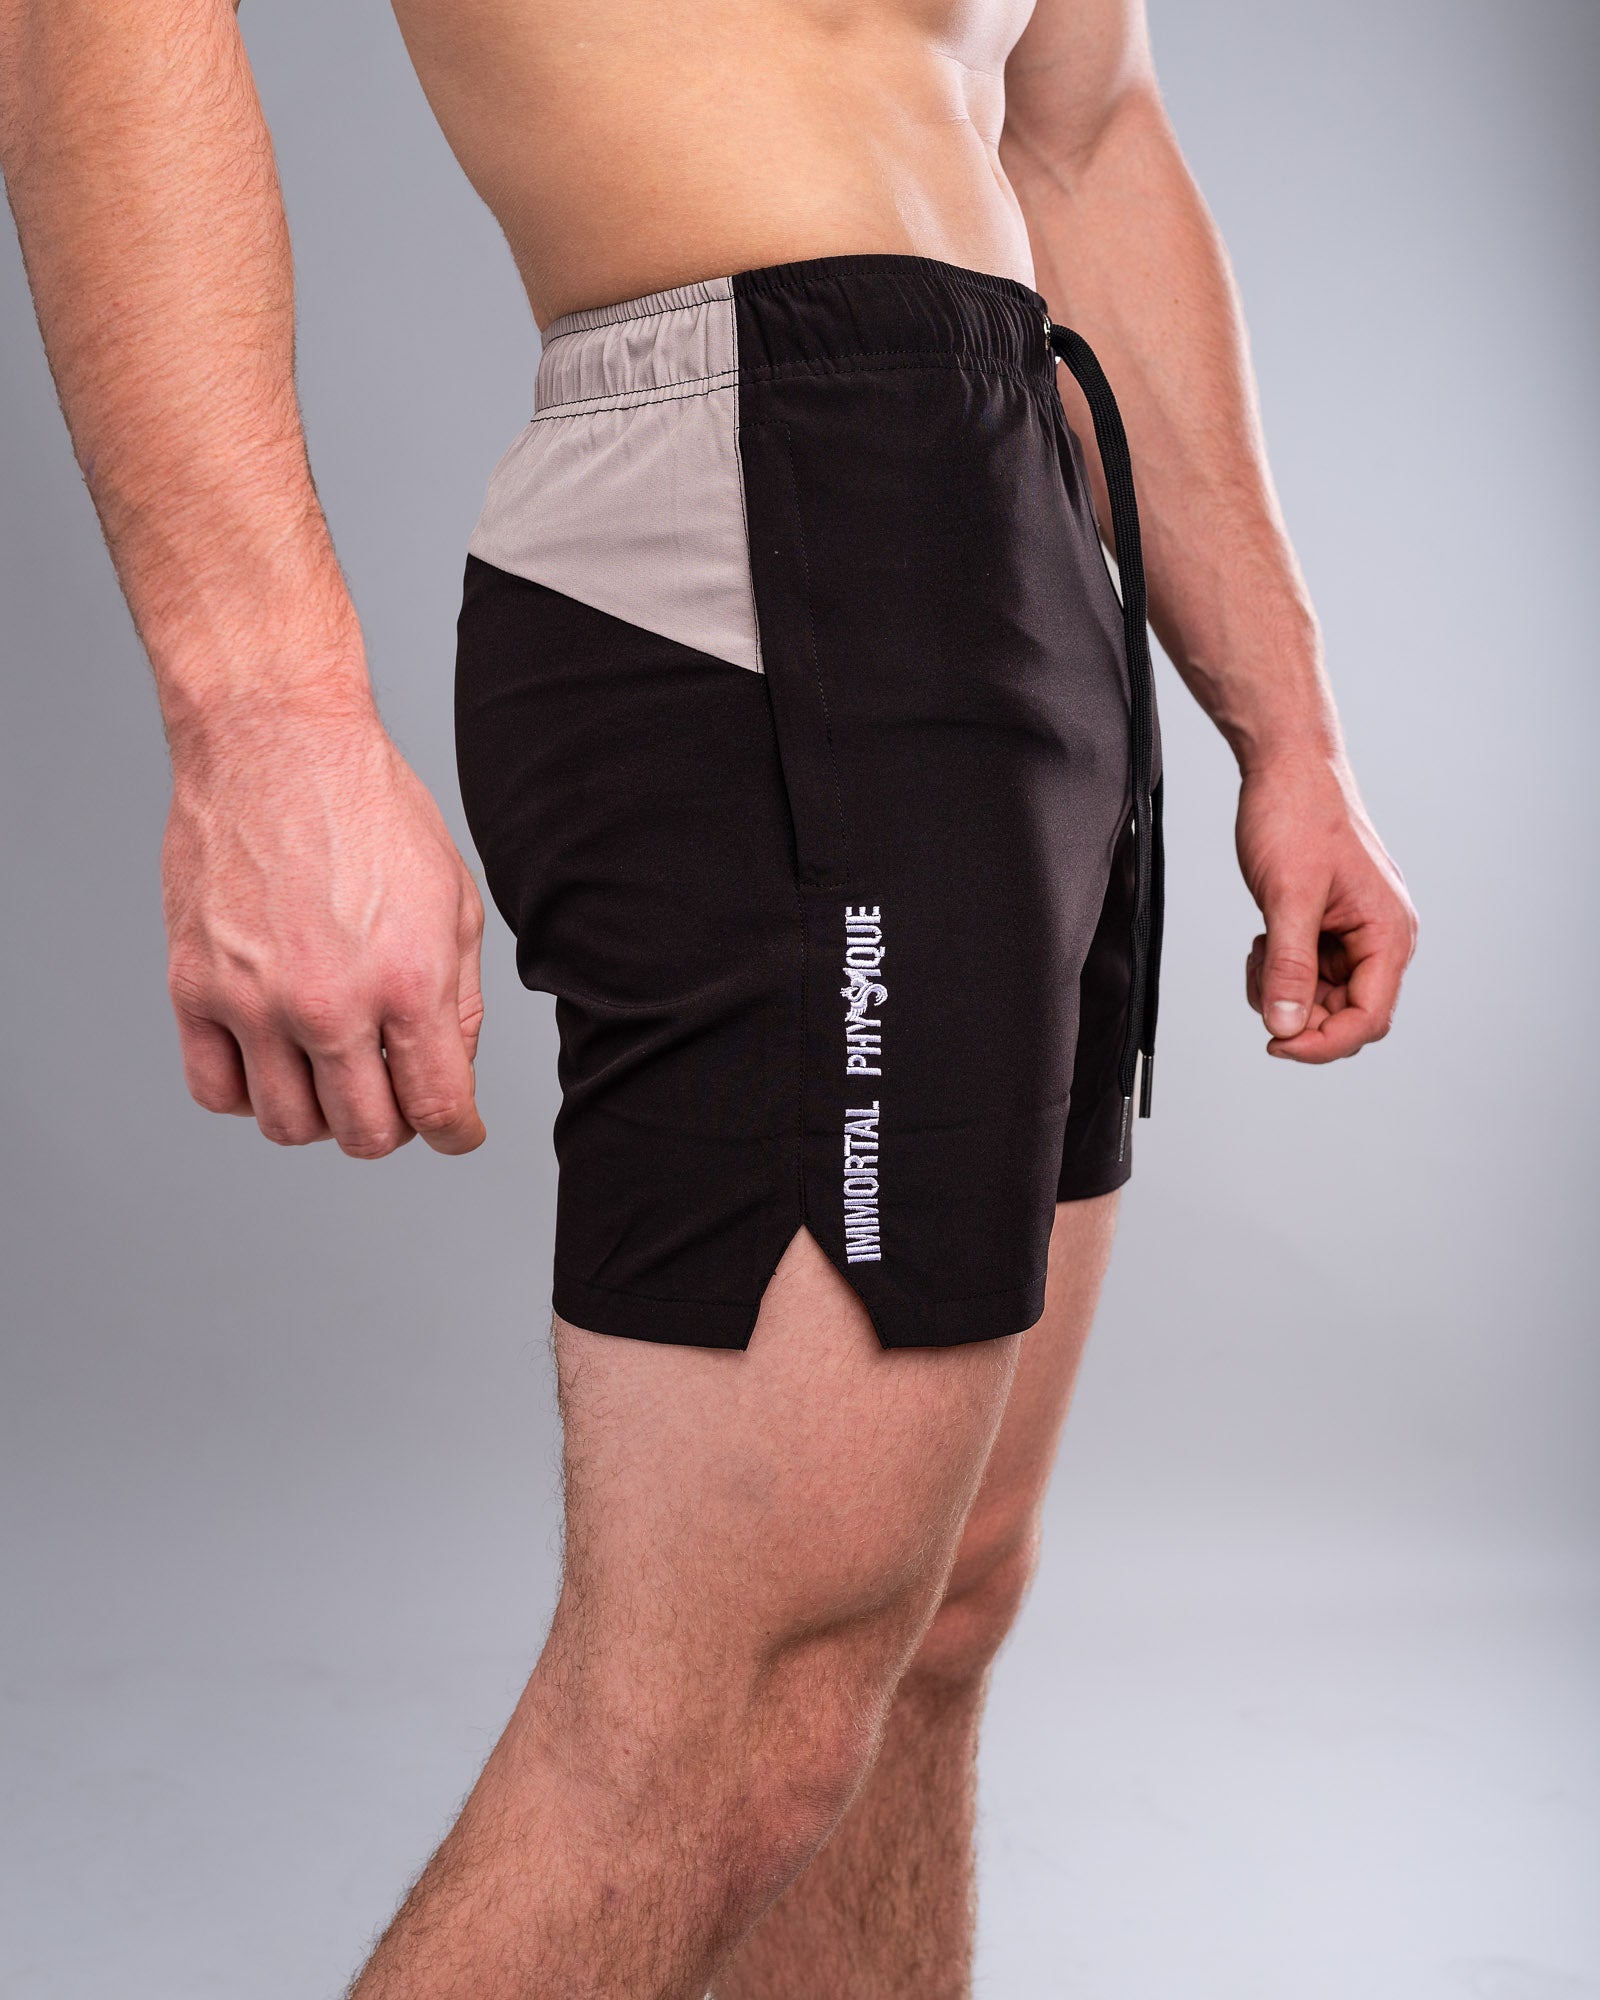 Mens gym shorts fitness swimming apparel by Immortal Physique